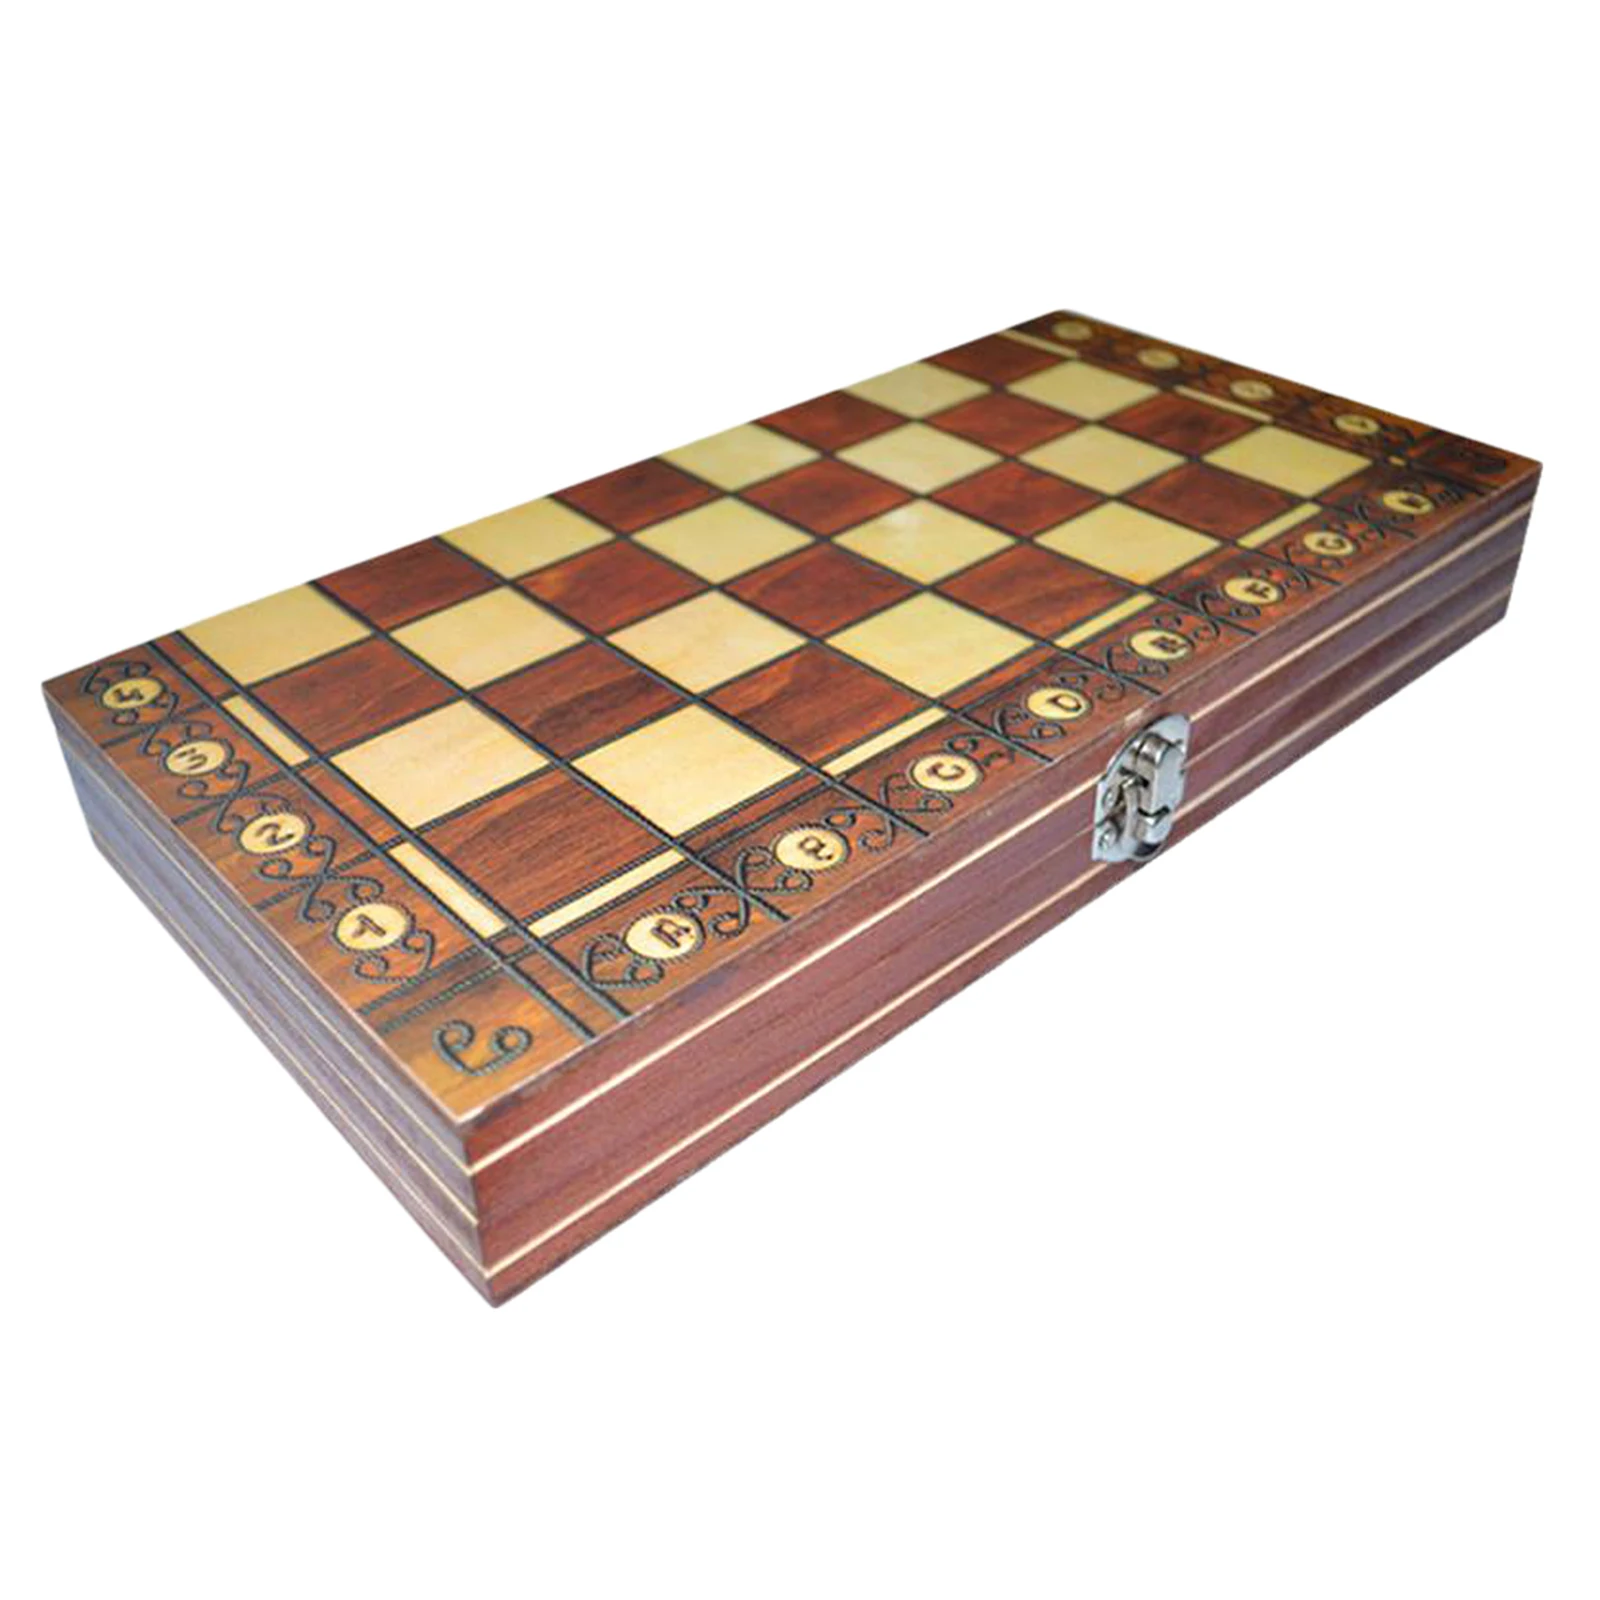 39x39cm Folding Wooden Board Game Toy Set 3 in 1 Chess Checkers Backgammon Combo